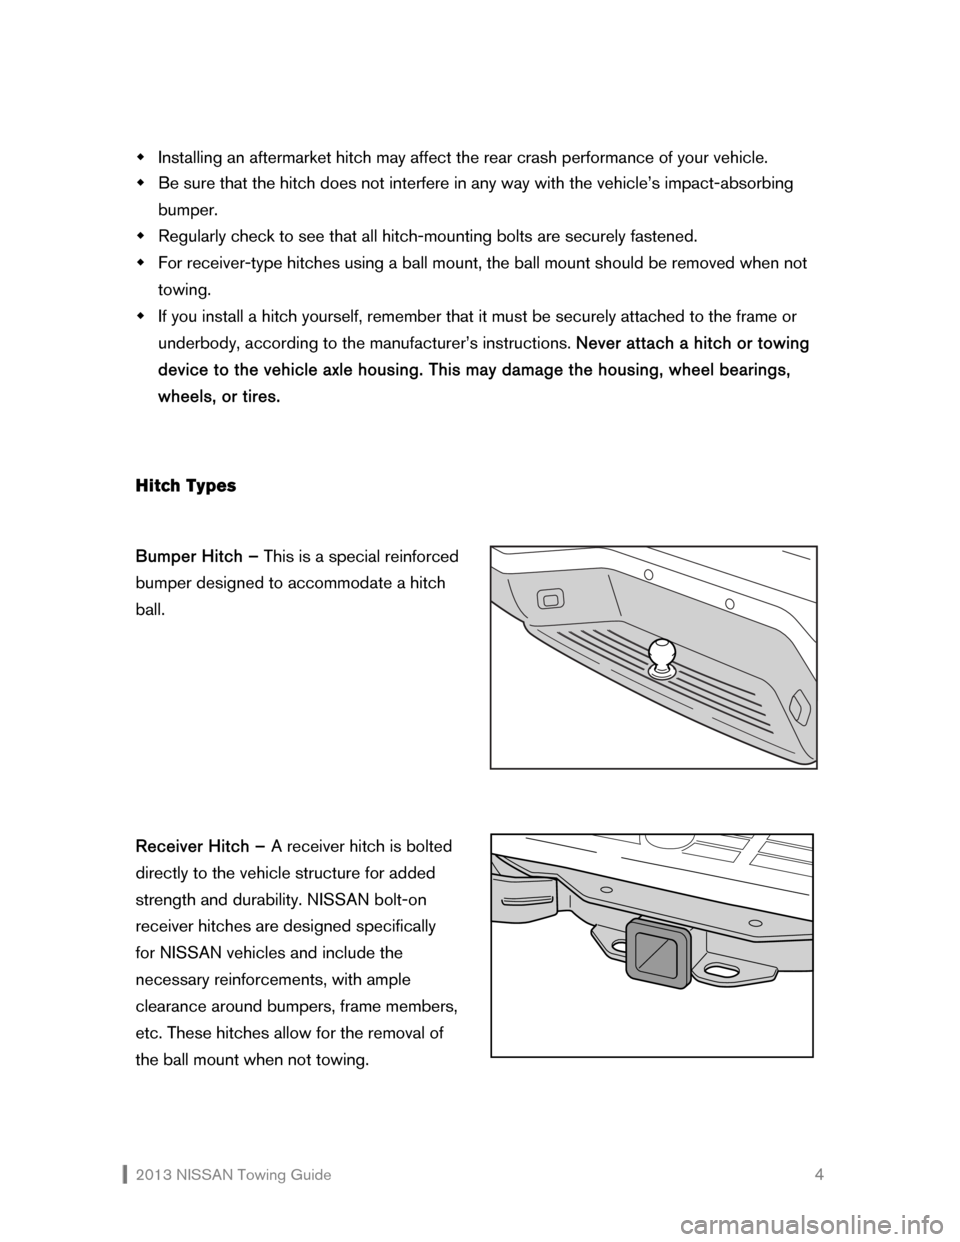 NISSAN 370Z COUPE 2013 Z34 Towing Guide  2013 NISSAN Towing Guide    4 �Š Installing an aftermarket hitch may affect the rear crash performance of your vehicle. 
�Š Be sure that the hitch does not interfere in any way with the vehicle’s